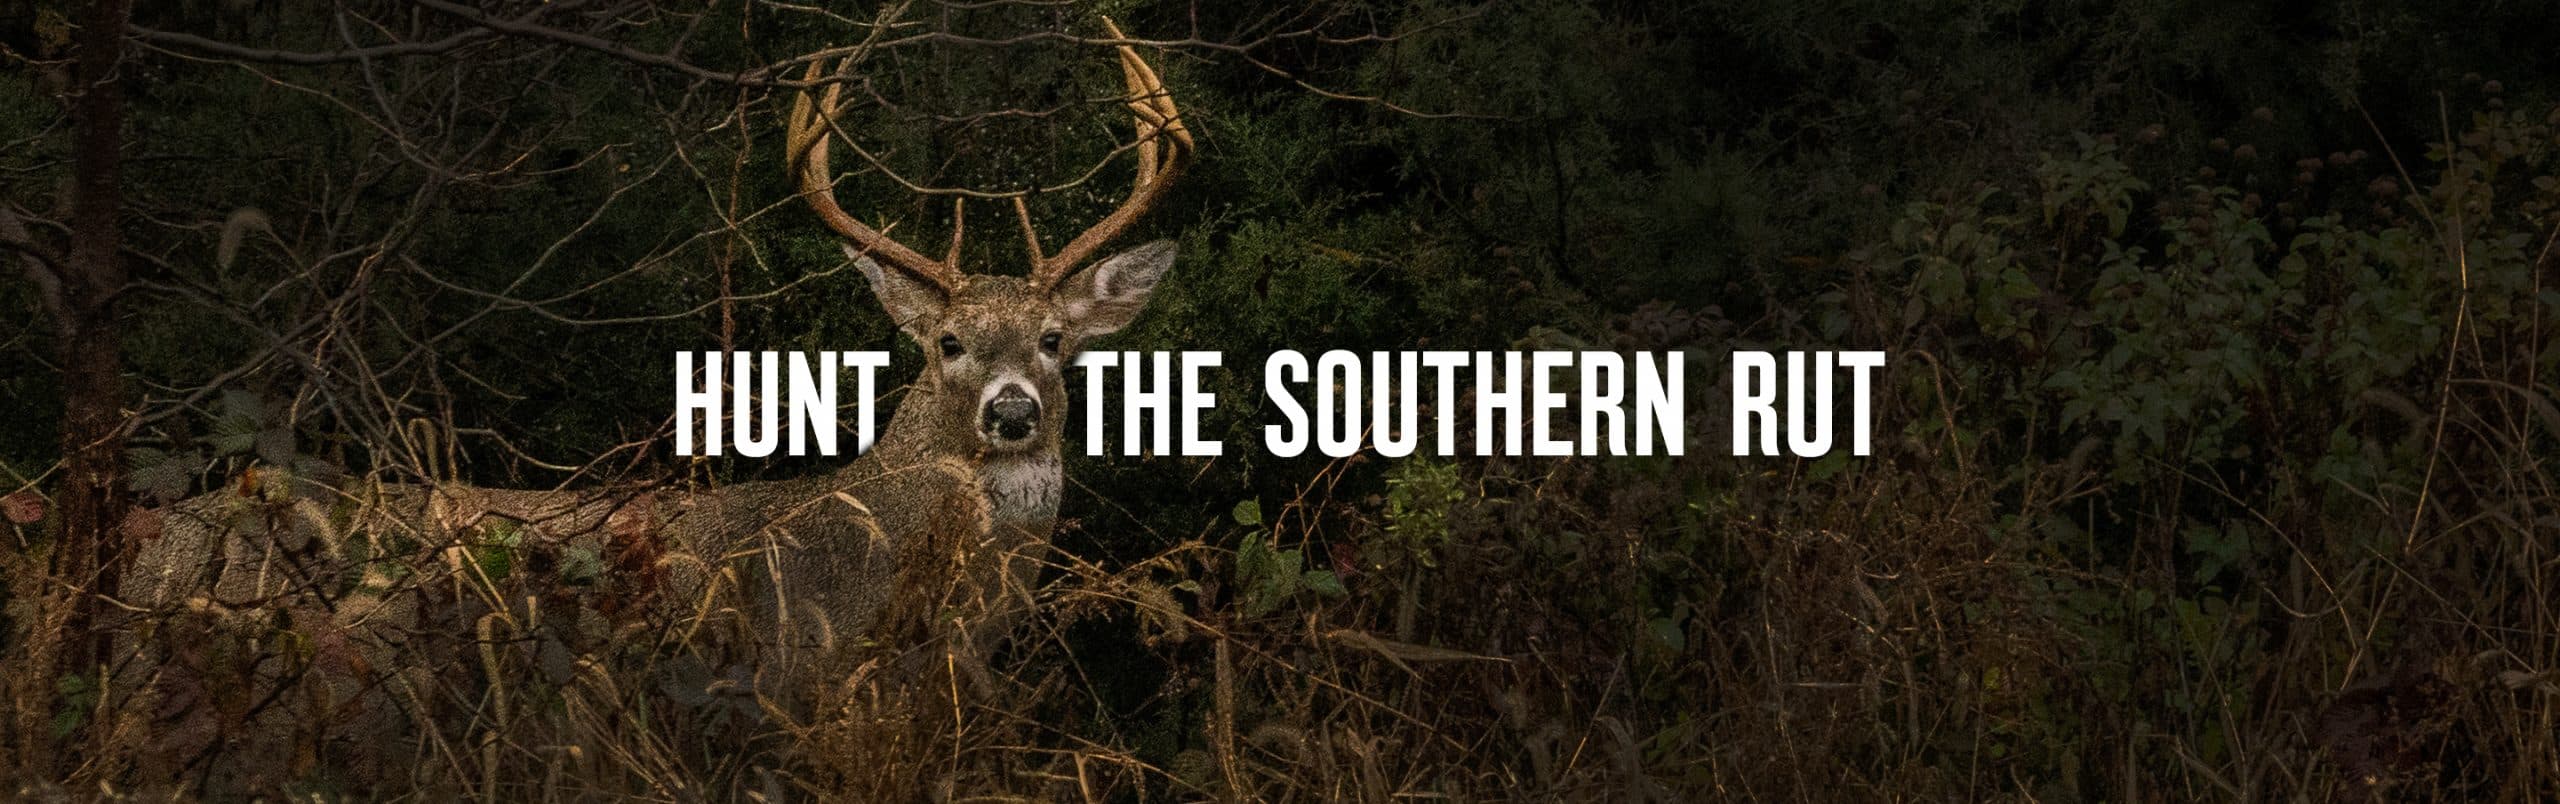 Hunt the Southern Rut onX